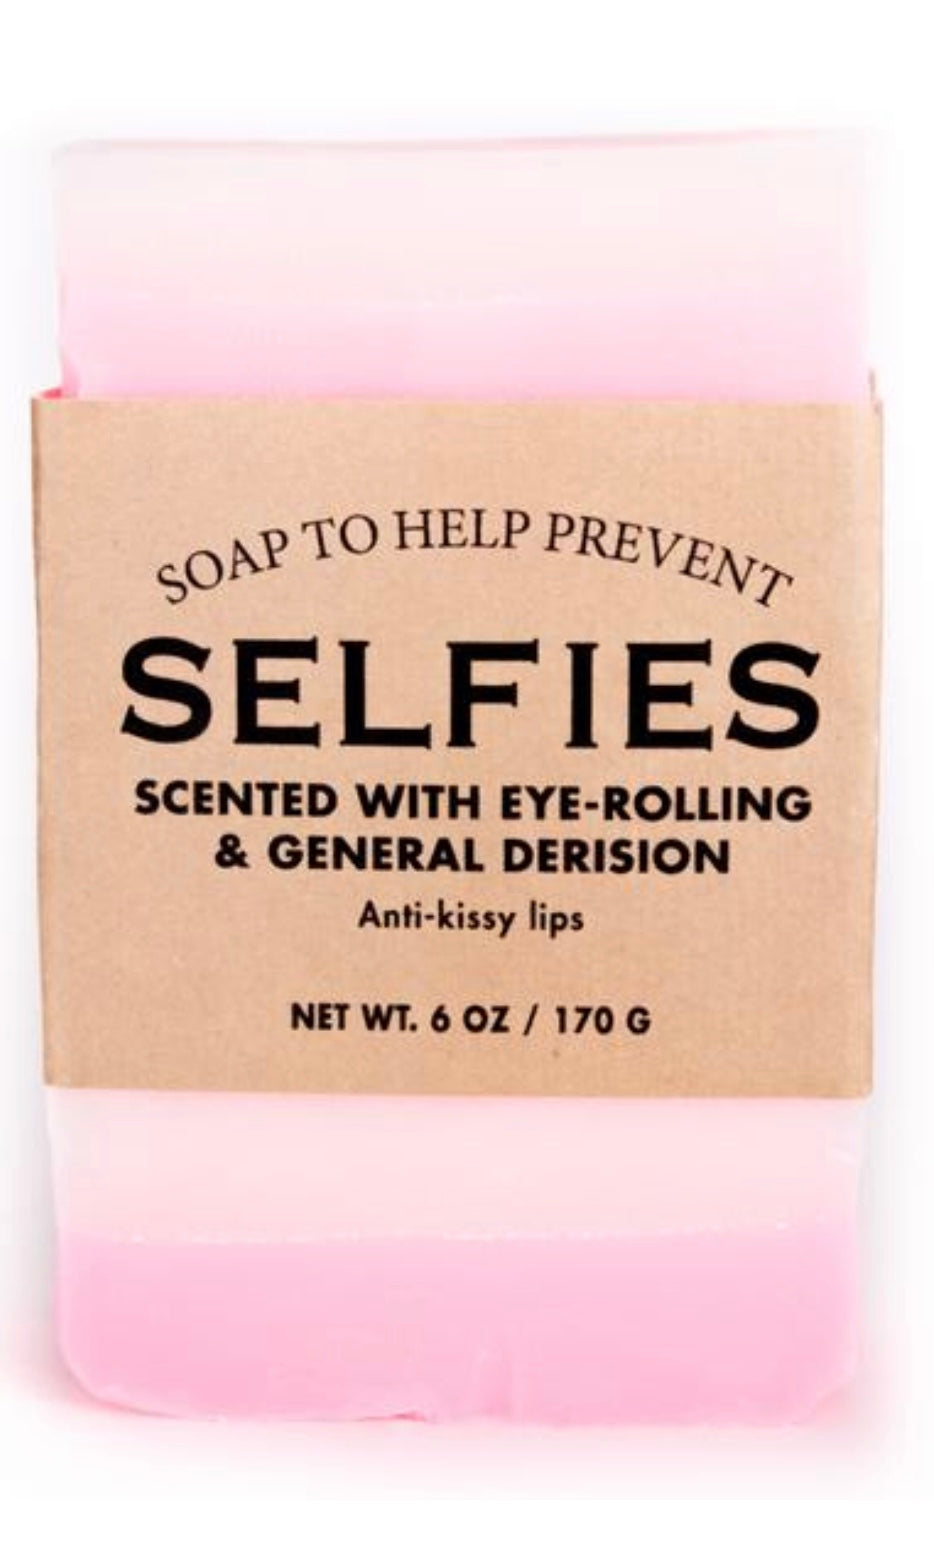 -Whisky River Soap for Selfies